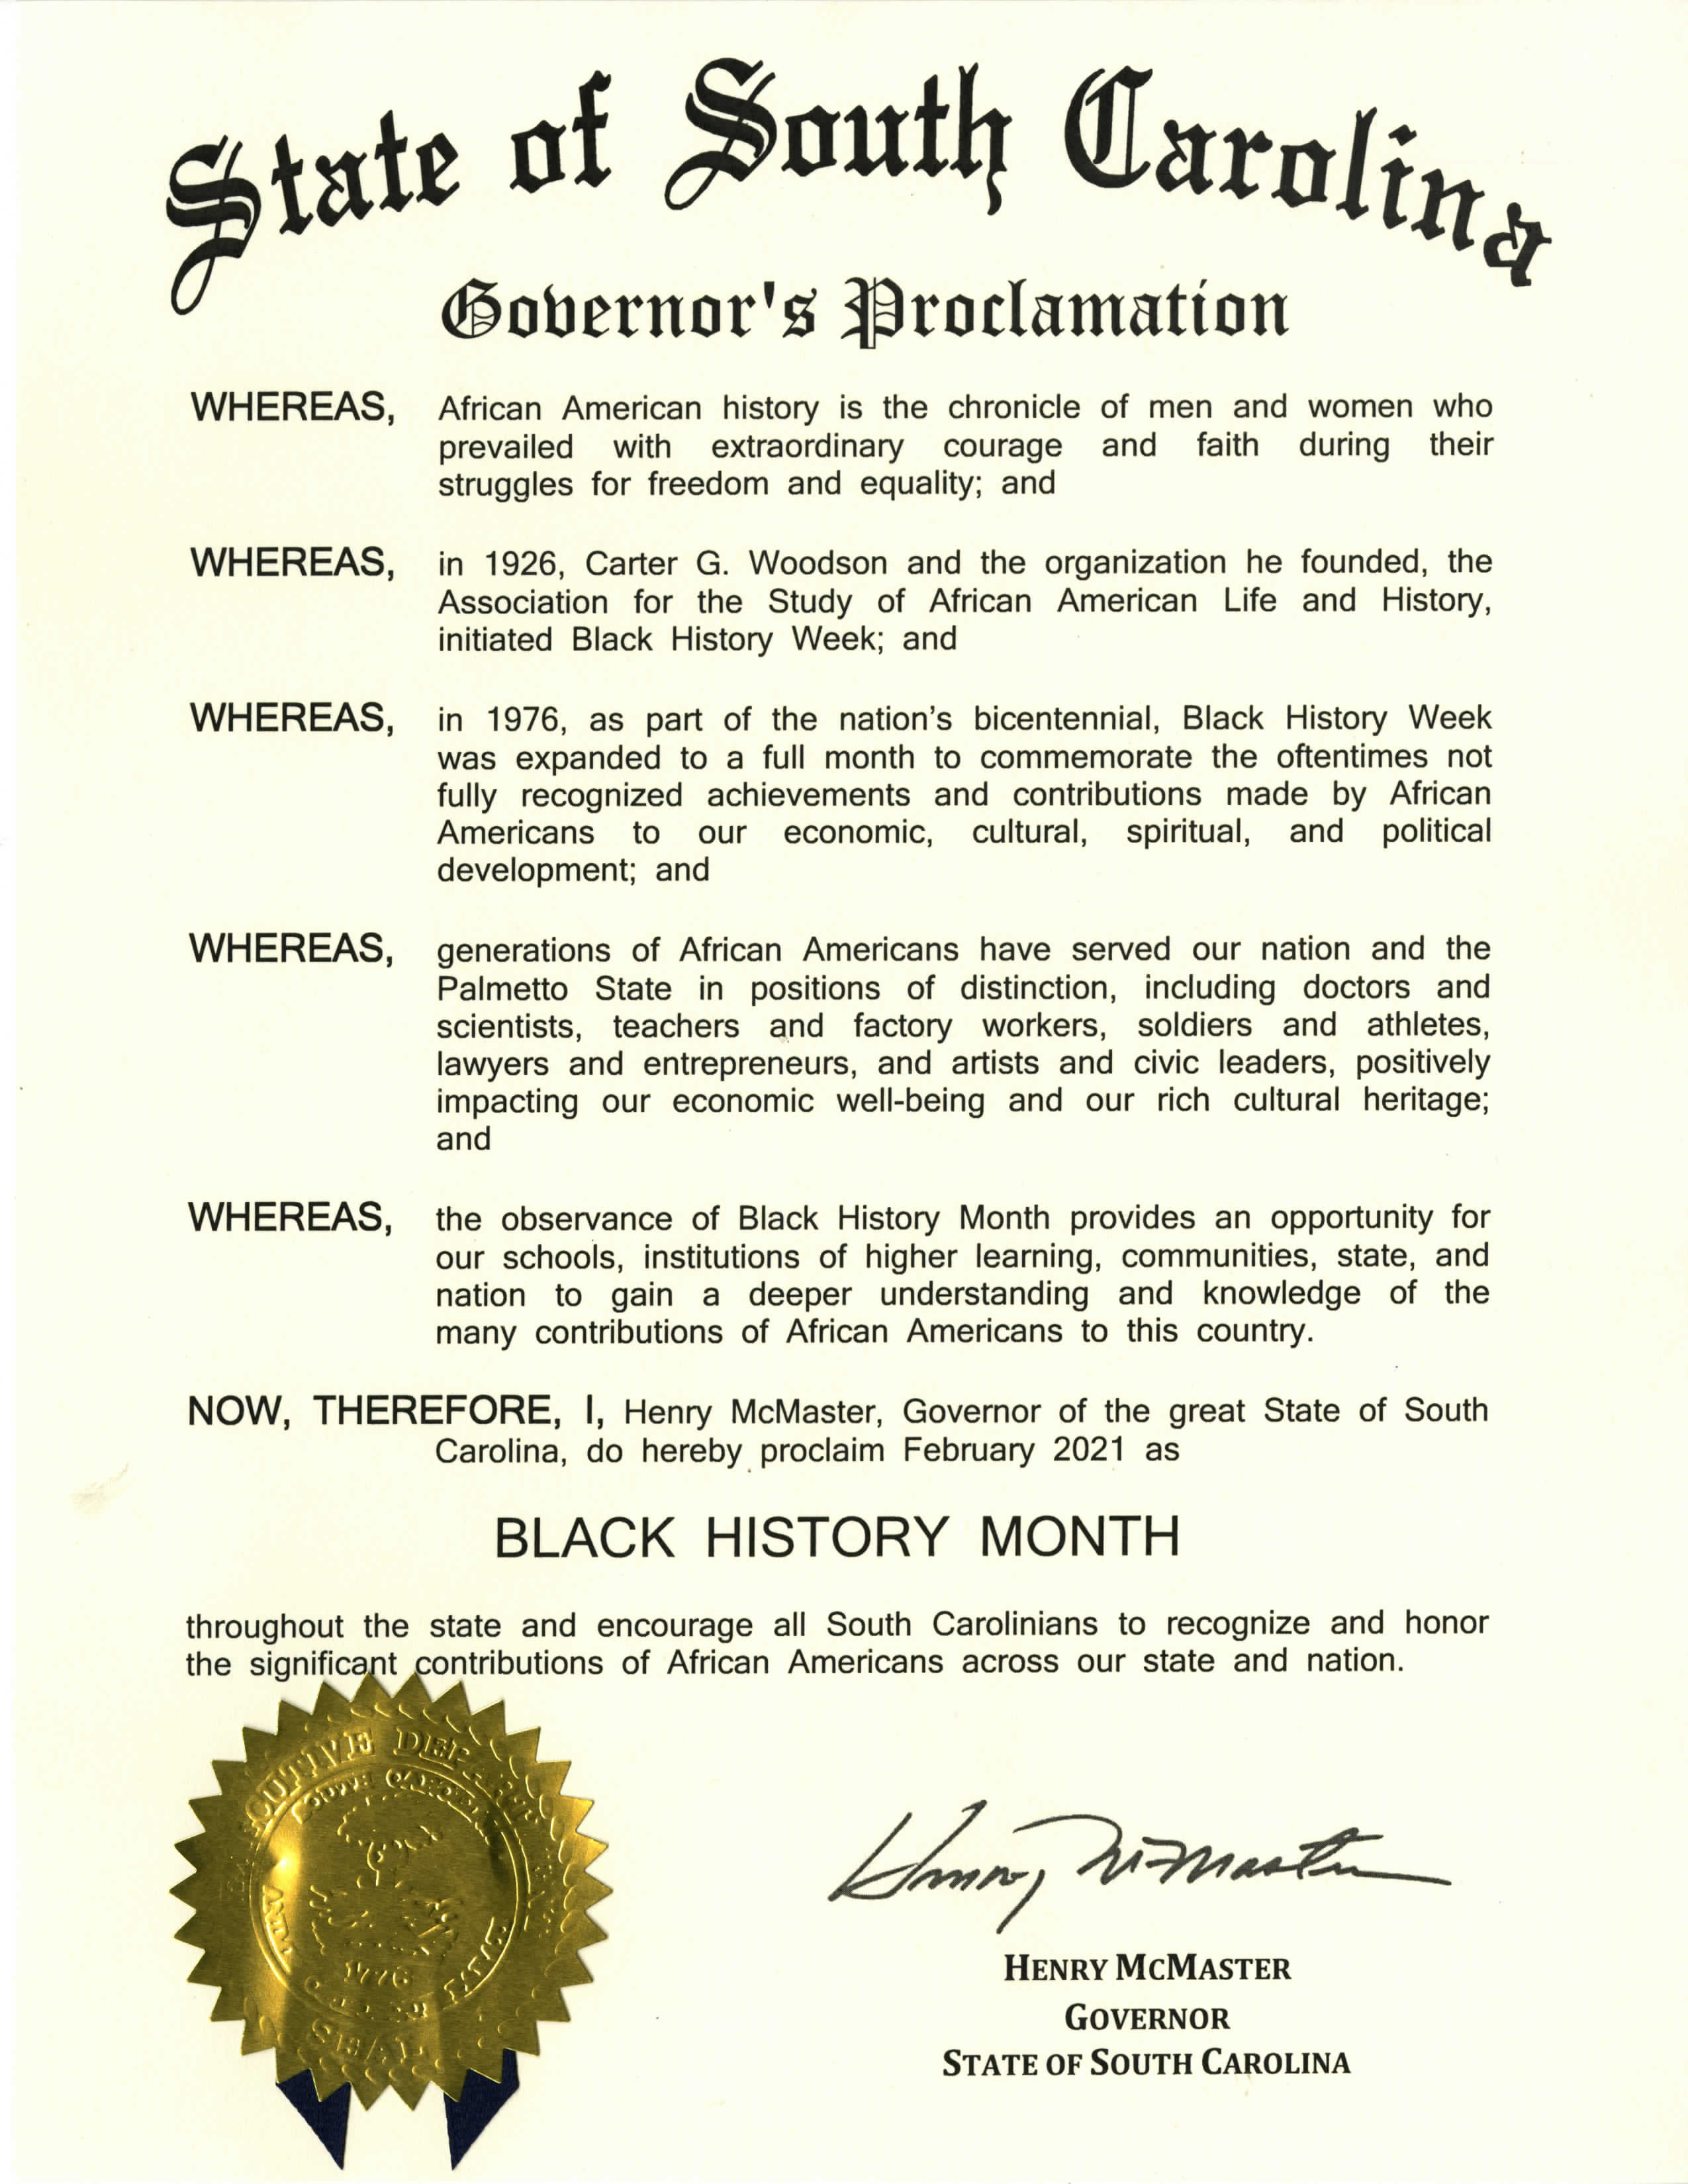 2021 Governor's Proclamation for Black History Month